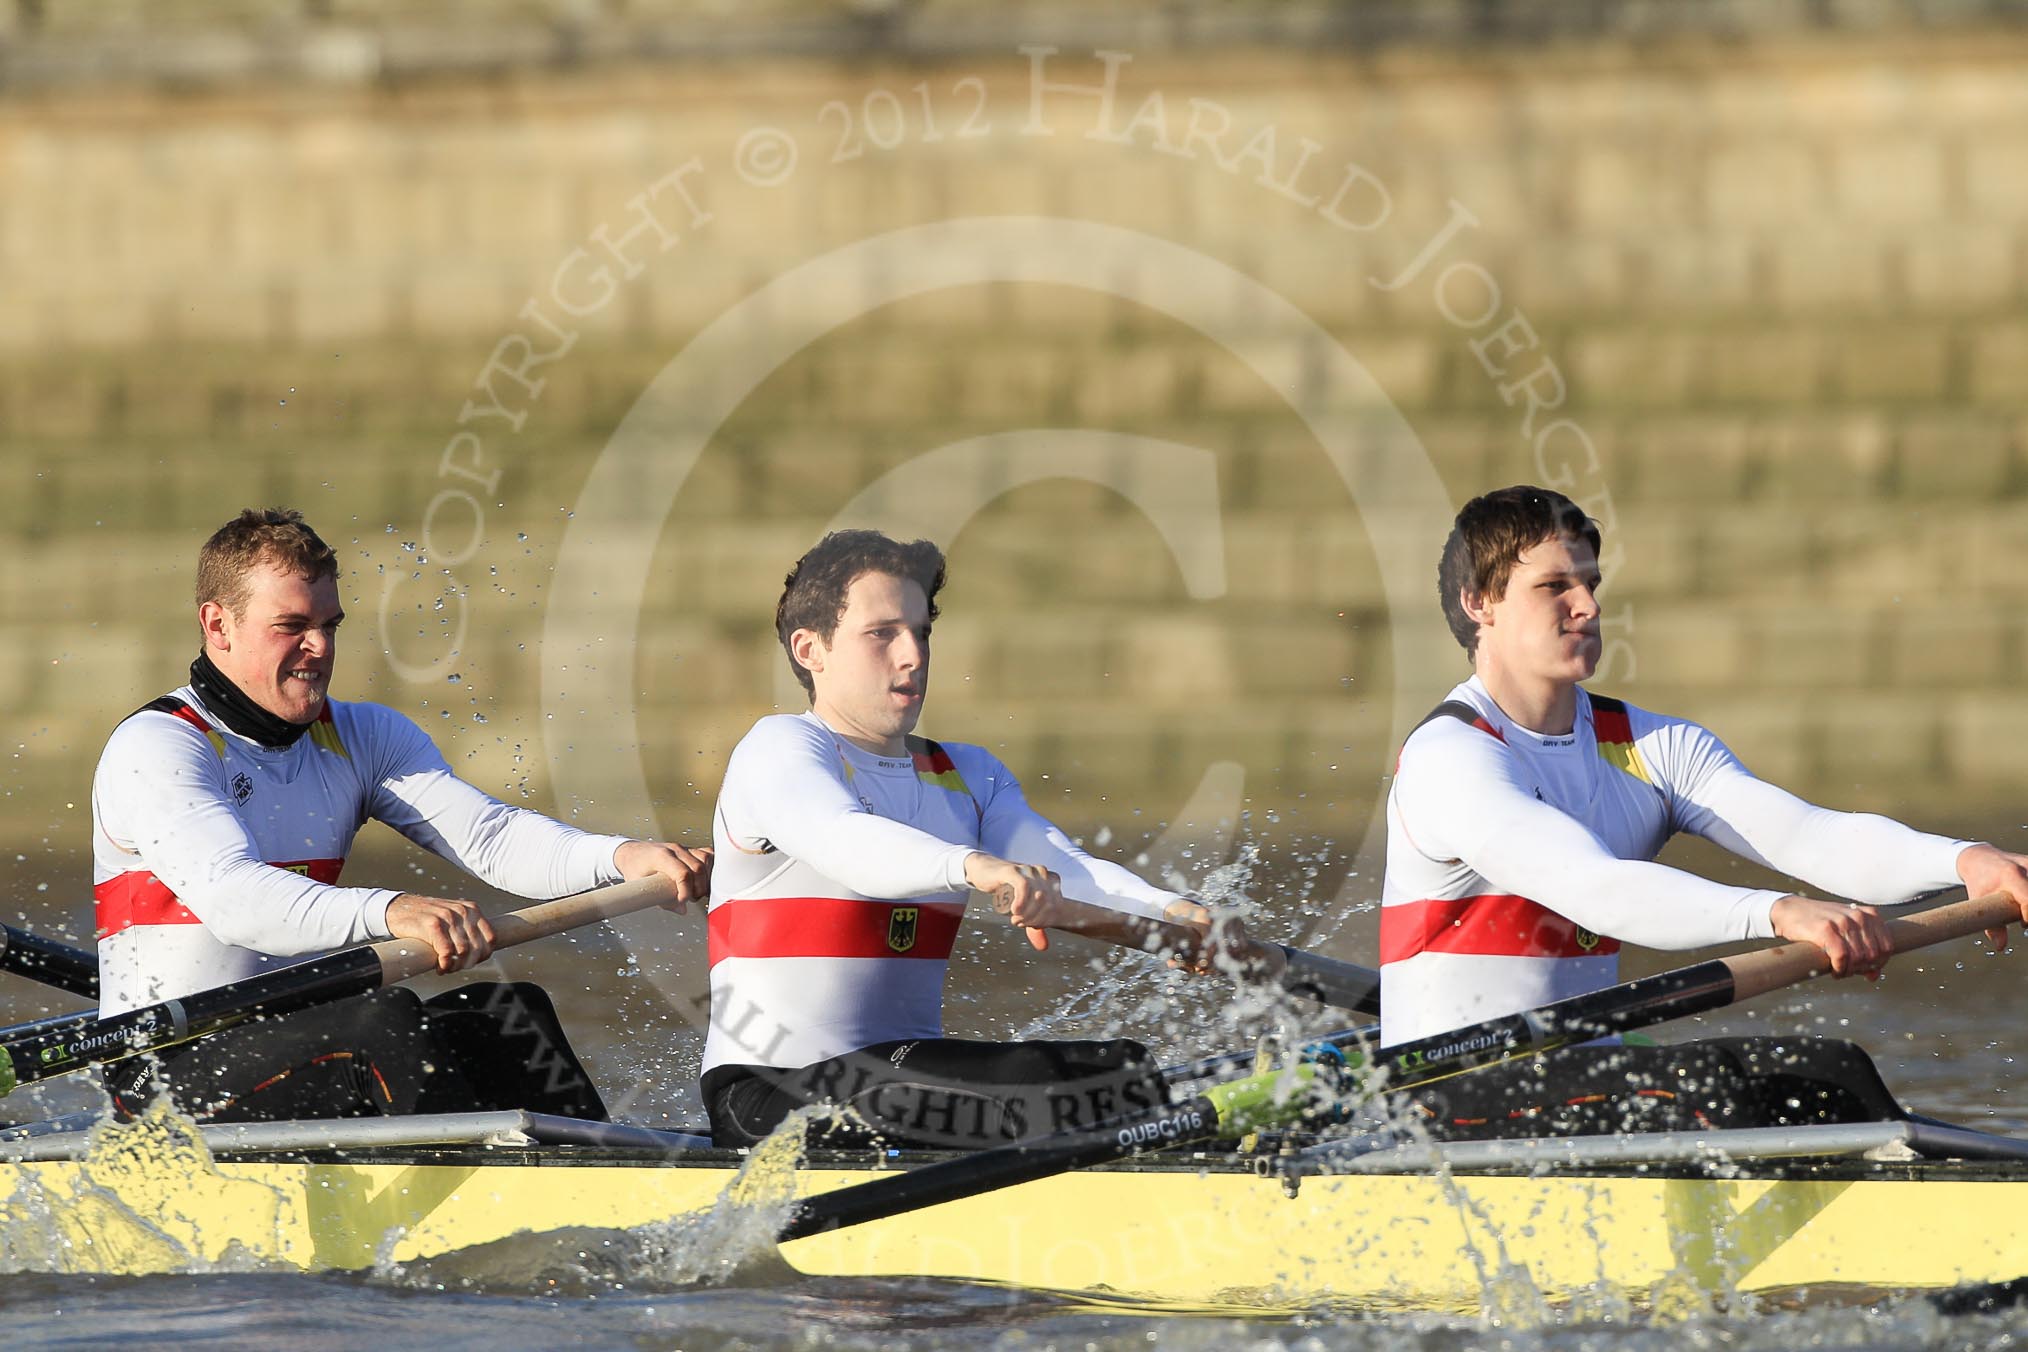 The Boat Race season 2012 - fixture OUBC vs German U23: The German U23 boat, from left to right Robin Ponte, Alexander Thierfelder, and Malte Jaschik..
River Thames between Putney and Mortlake,
London,

United Kingdom,
on 26 February 2012 at 15:25, image #45